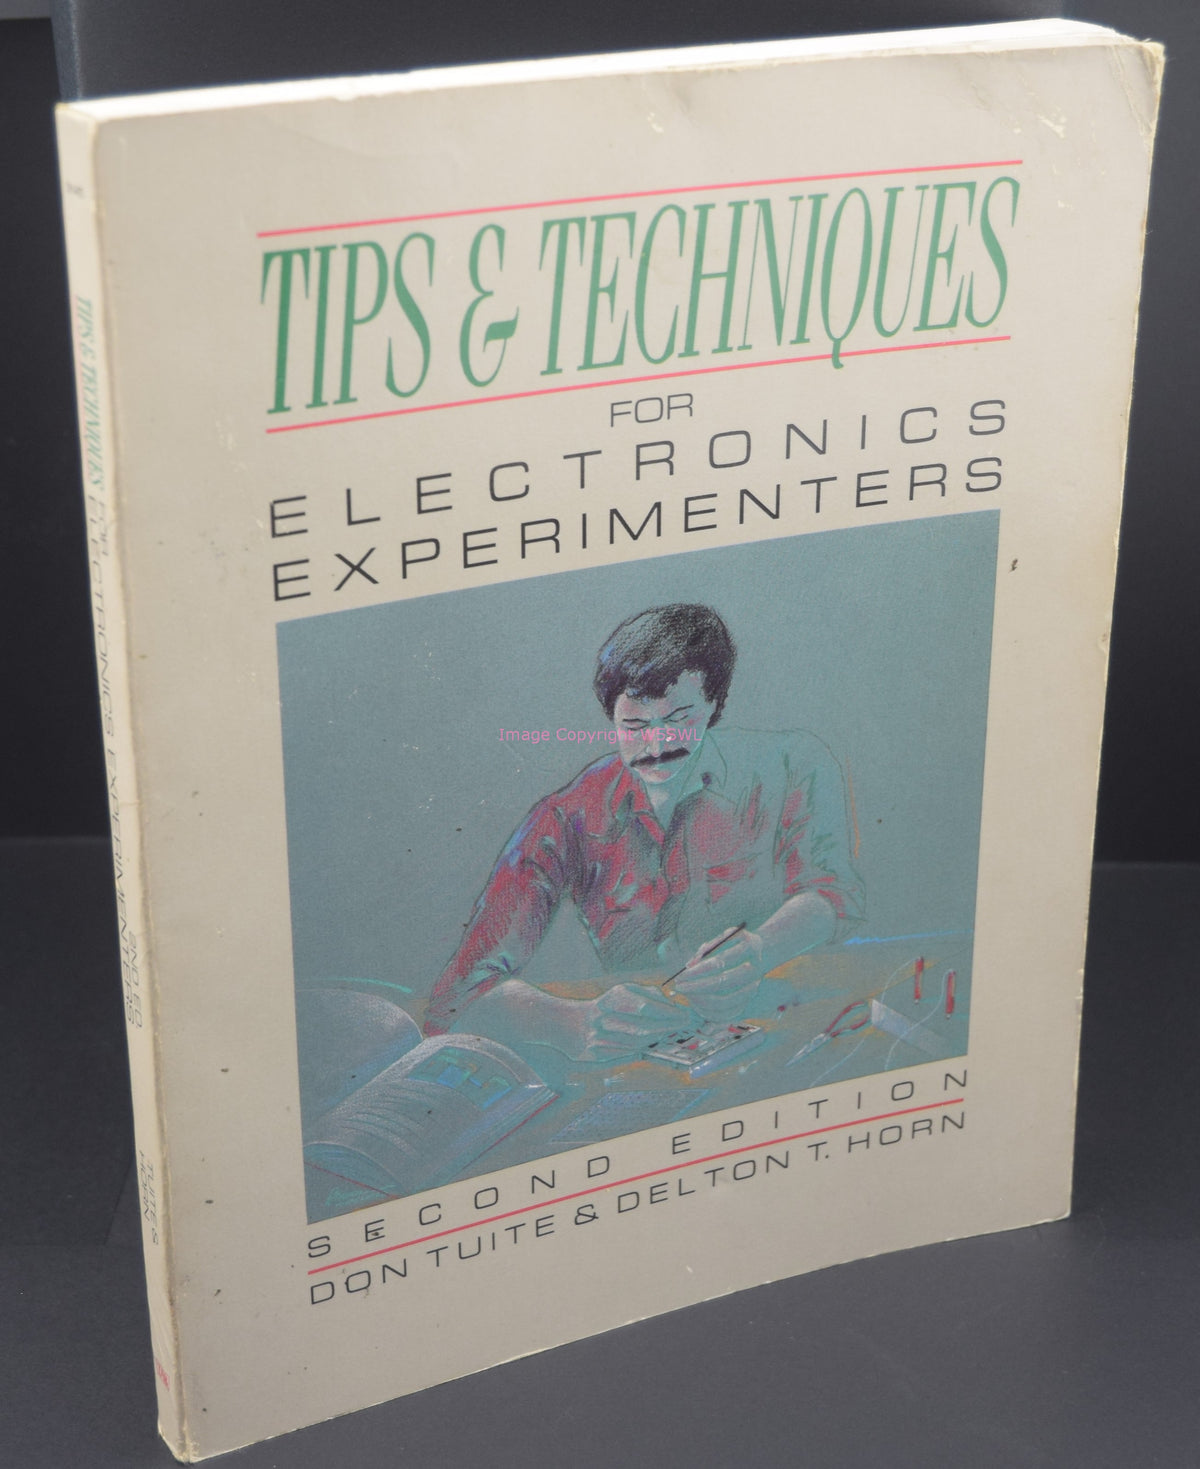 Tips & Techniques For Electronics Experimenters 2nd Edition Tab Books - Dave's Hobby Shop by W5SWL